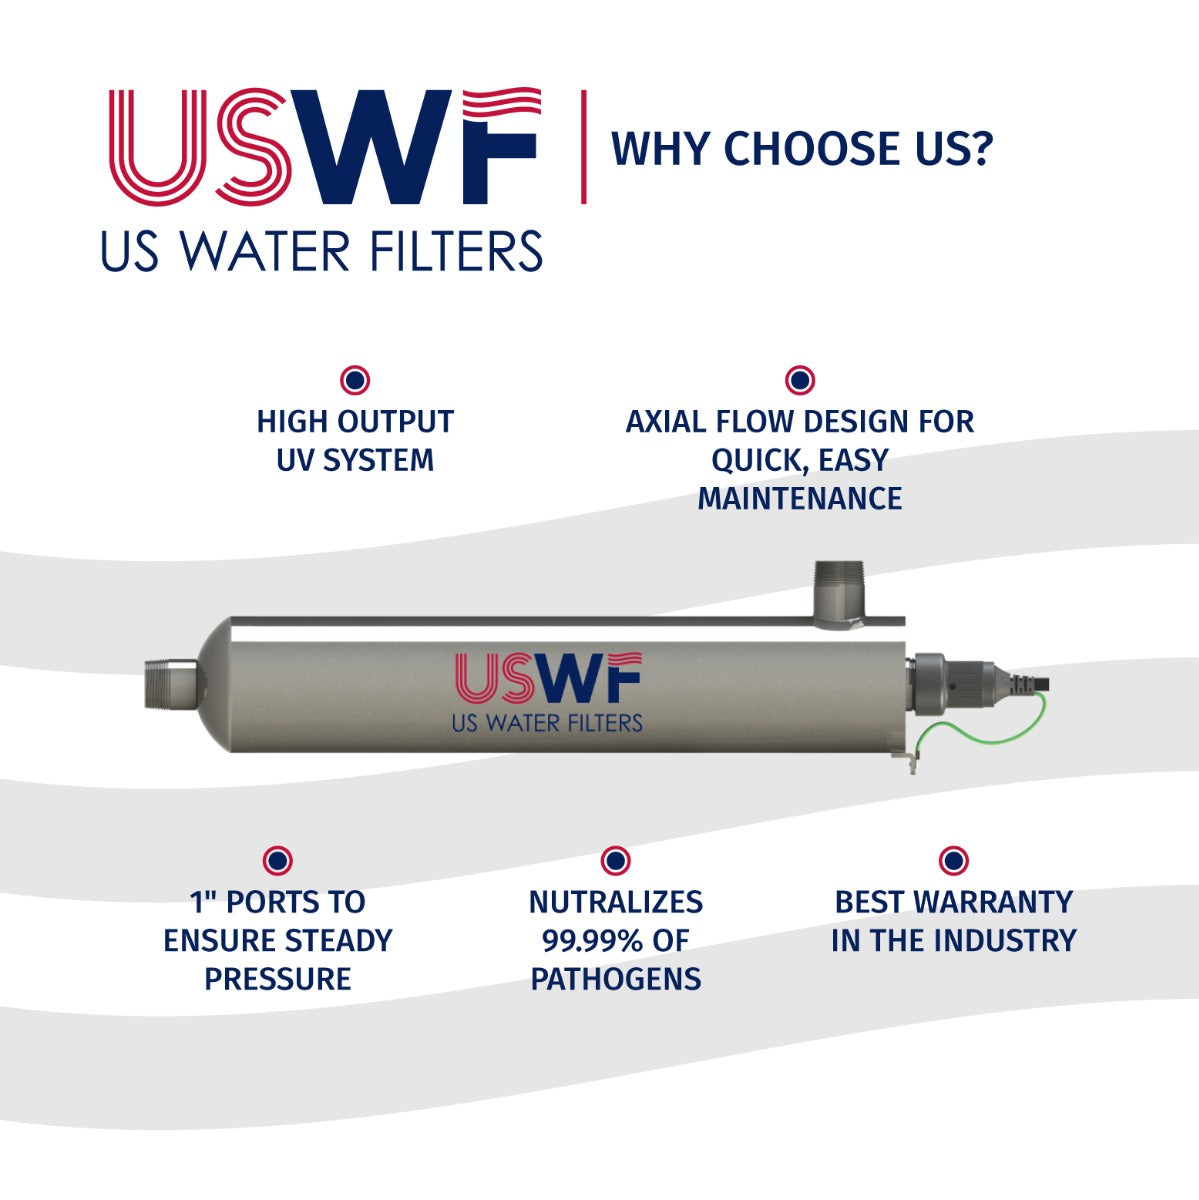 USWF RL420HO Replacement UV Lamp | Fits US Water Filters 4C151/4CR2 Whole House UV Systems